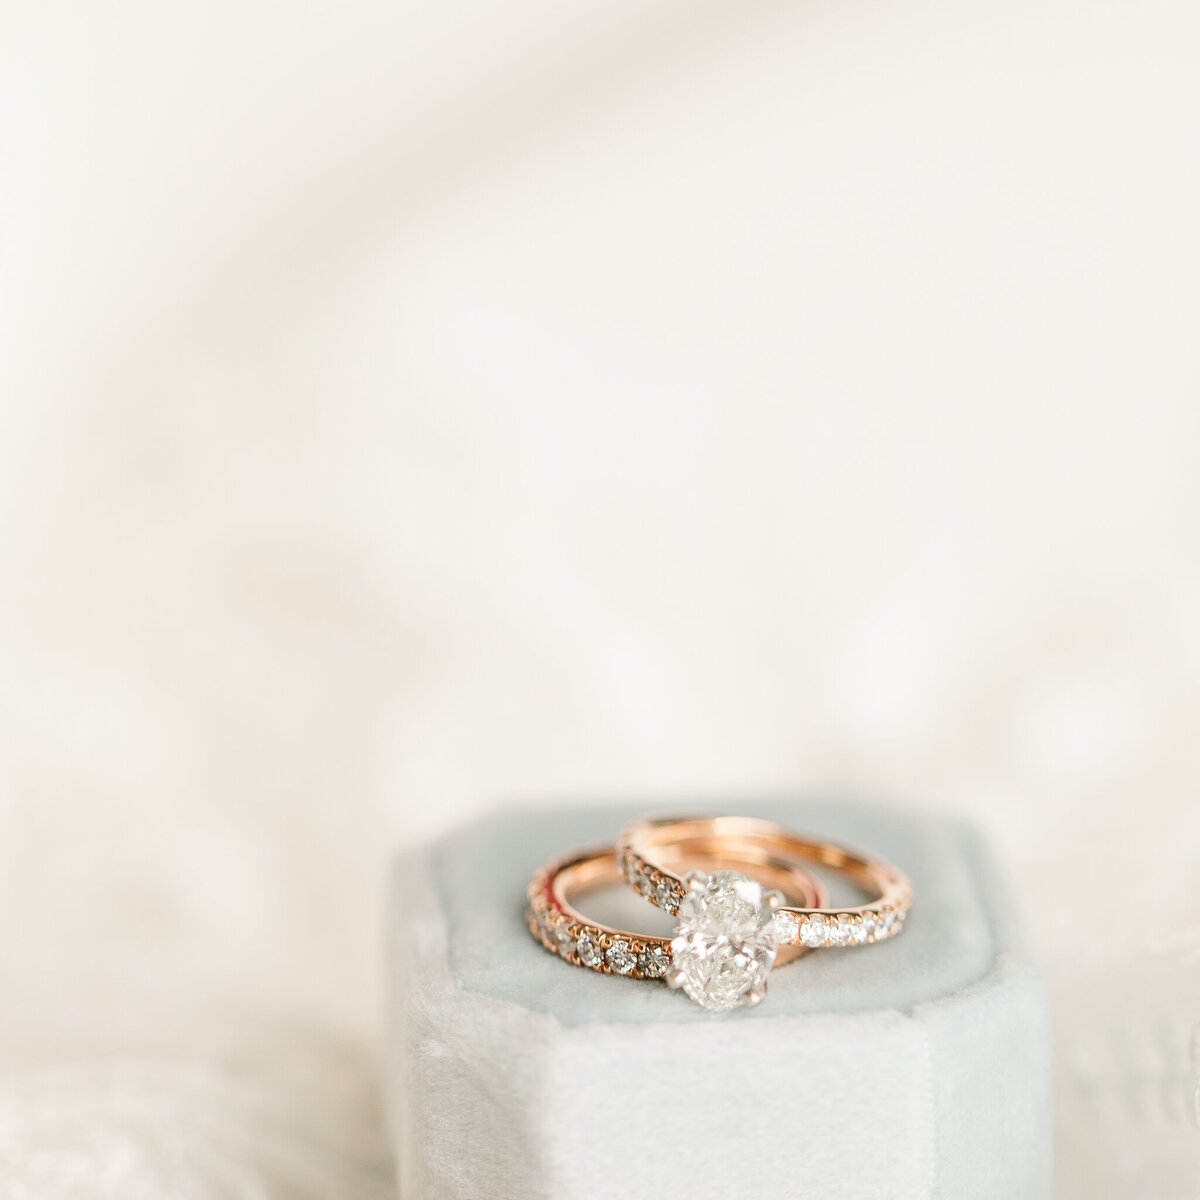 Rose gold engagement ring set are  photographed on top of a duty blue ring box